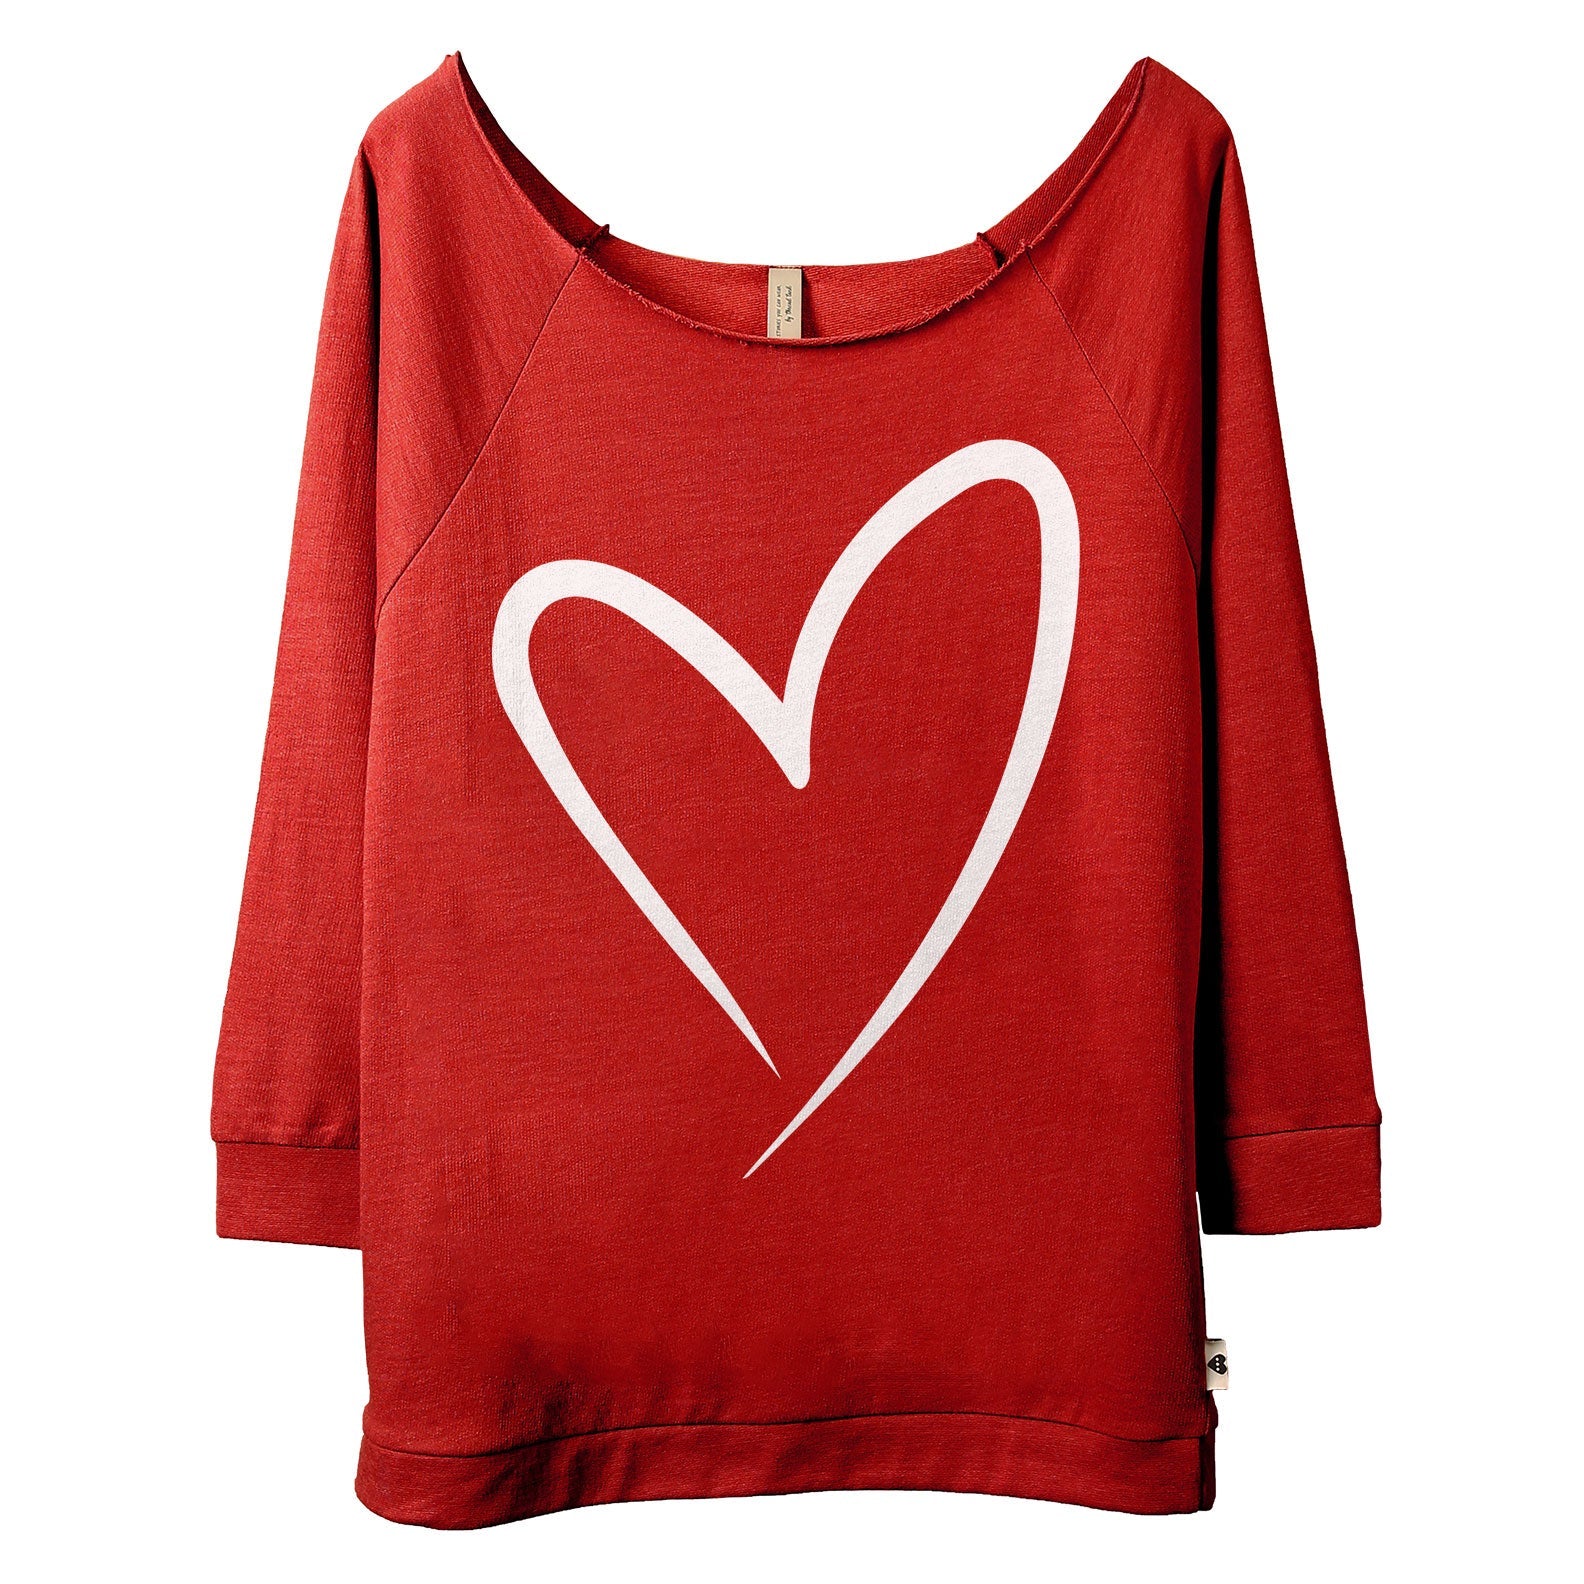 Heart Graphic Print Solid Pullover, Crew Neck Long Sleeve Casual Every Day  Sweatshirt, Women's Clothing